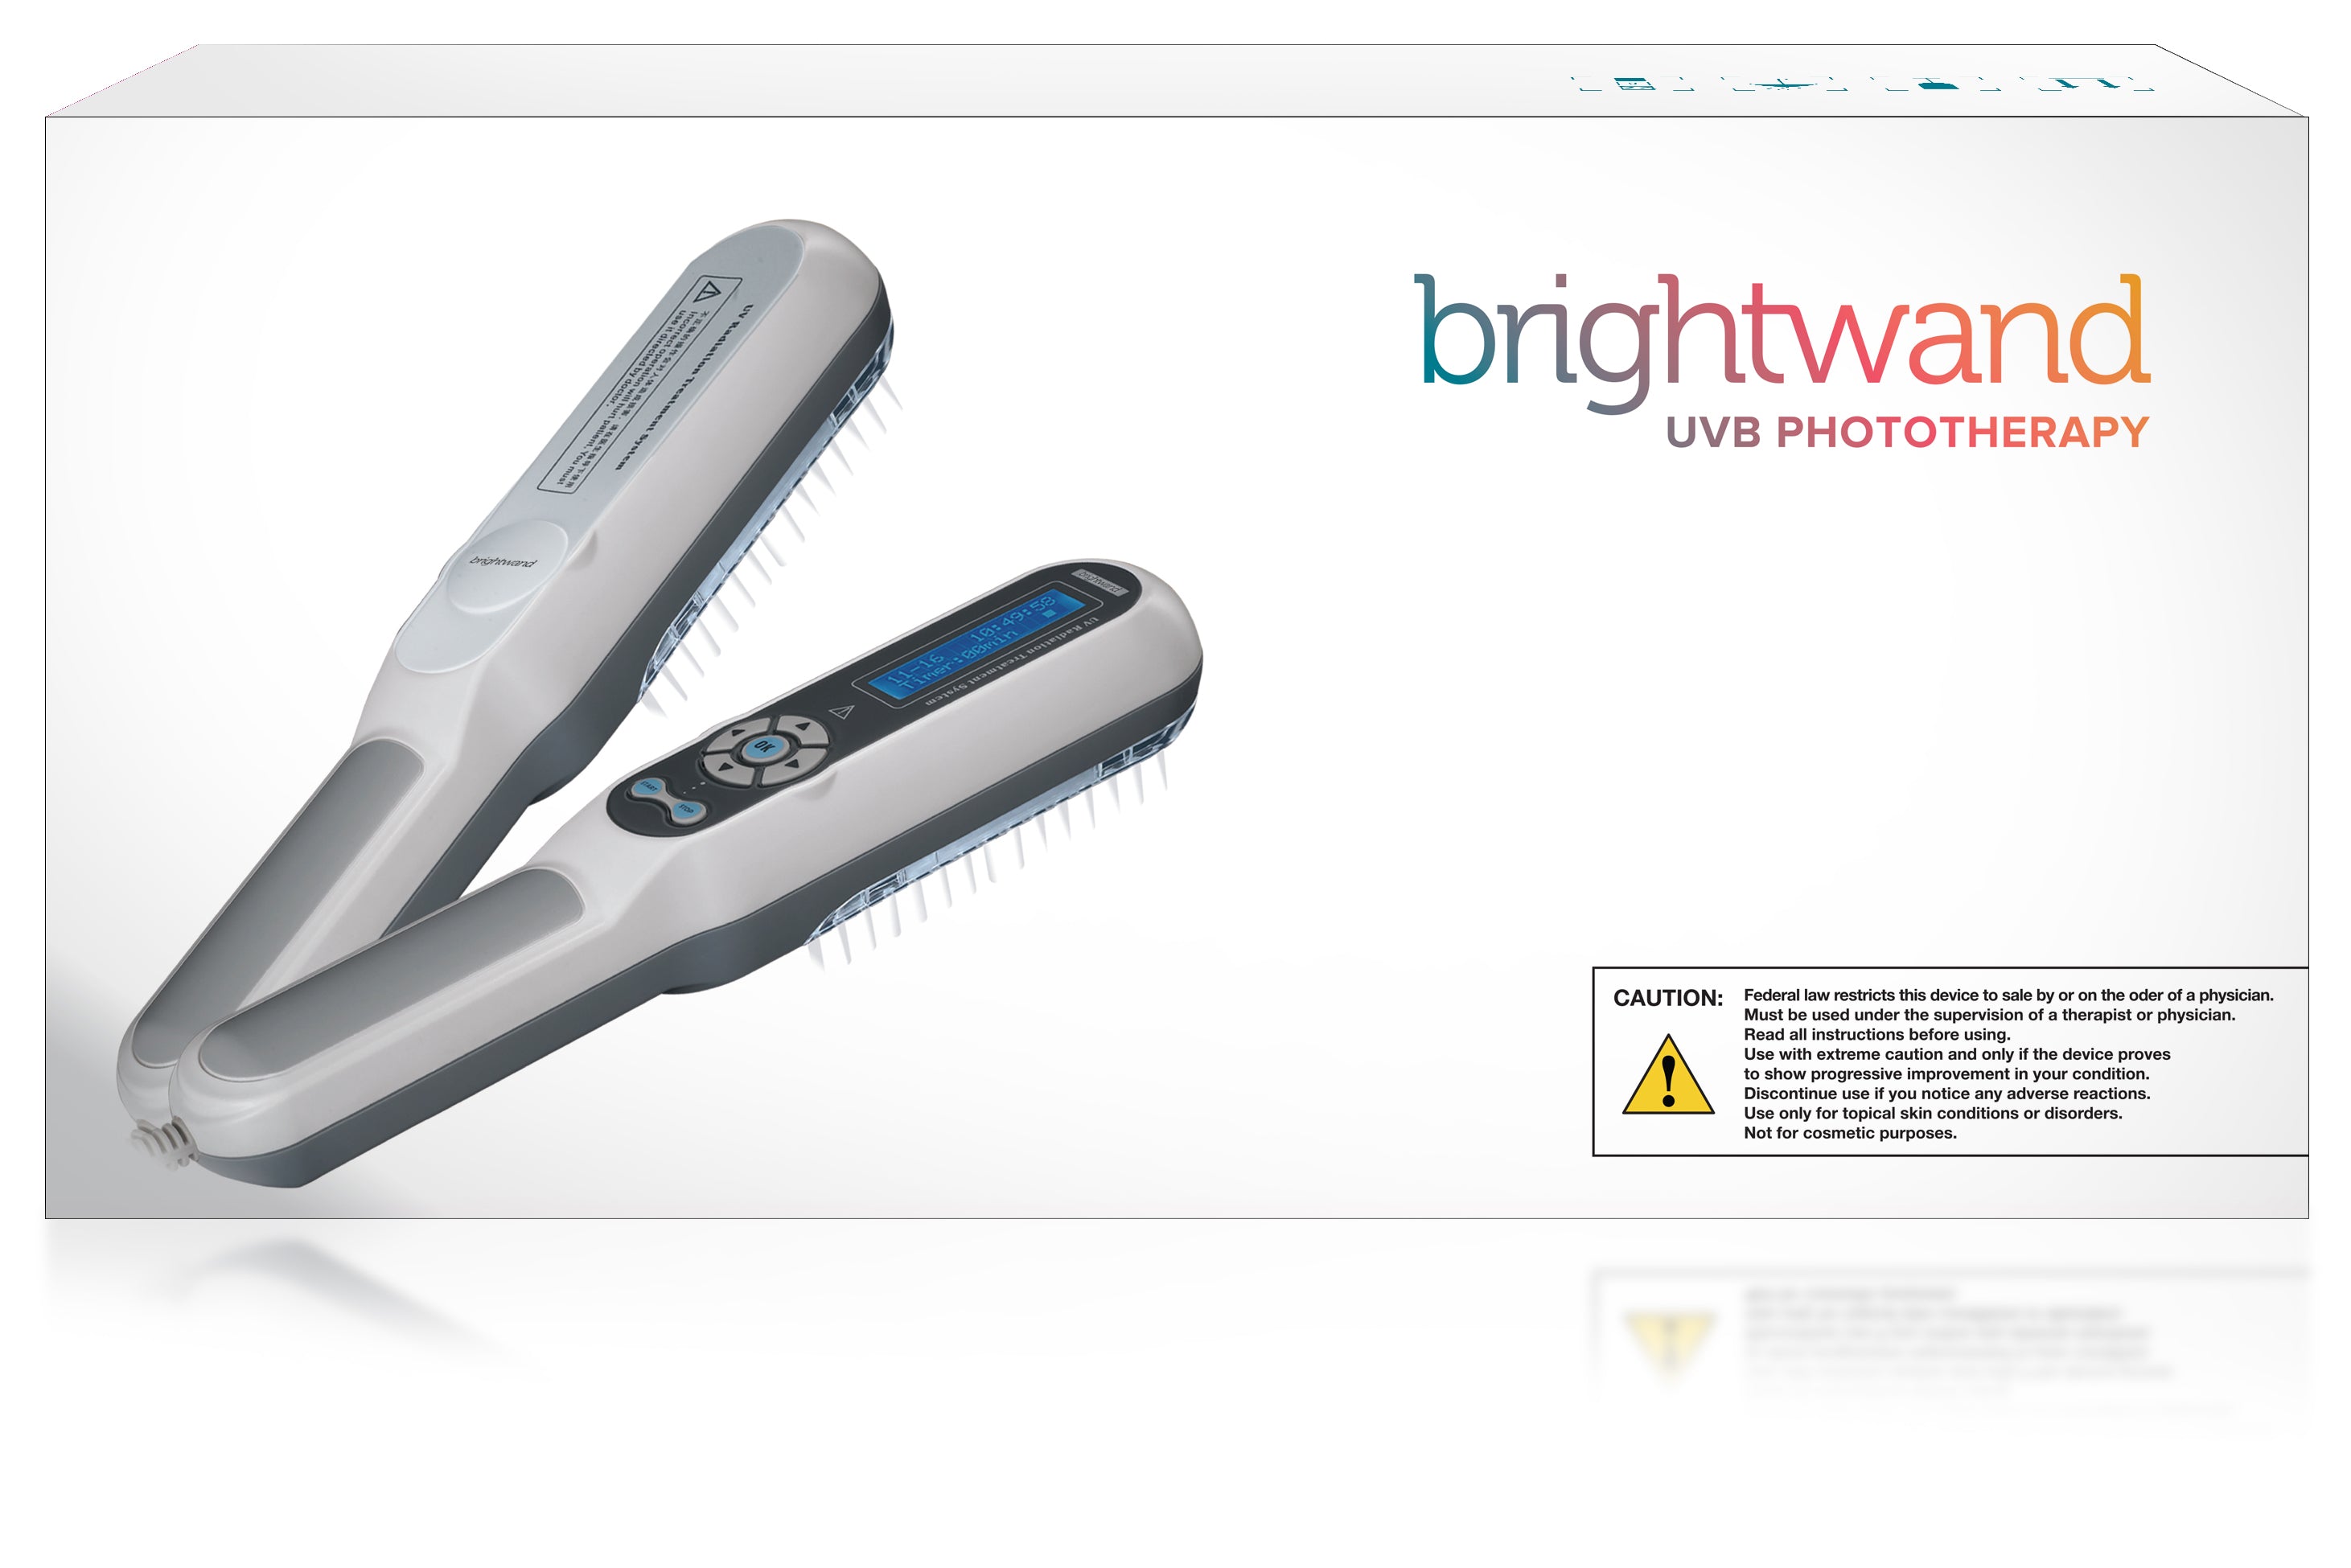 Corded UV 311nm Narrow Band Phototherapy Light by Brightwand, Light Therapy with Timer Control, Home Use with Goggles, UV/311nm – Medical Grade Philips Bulb. Treats a variety of skin conditions